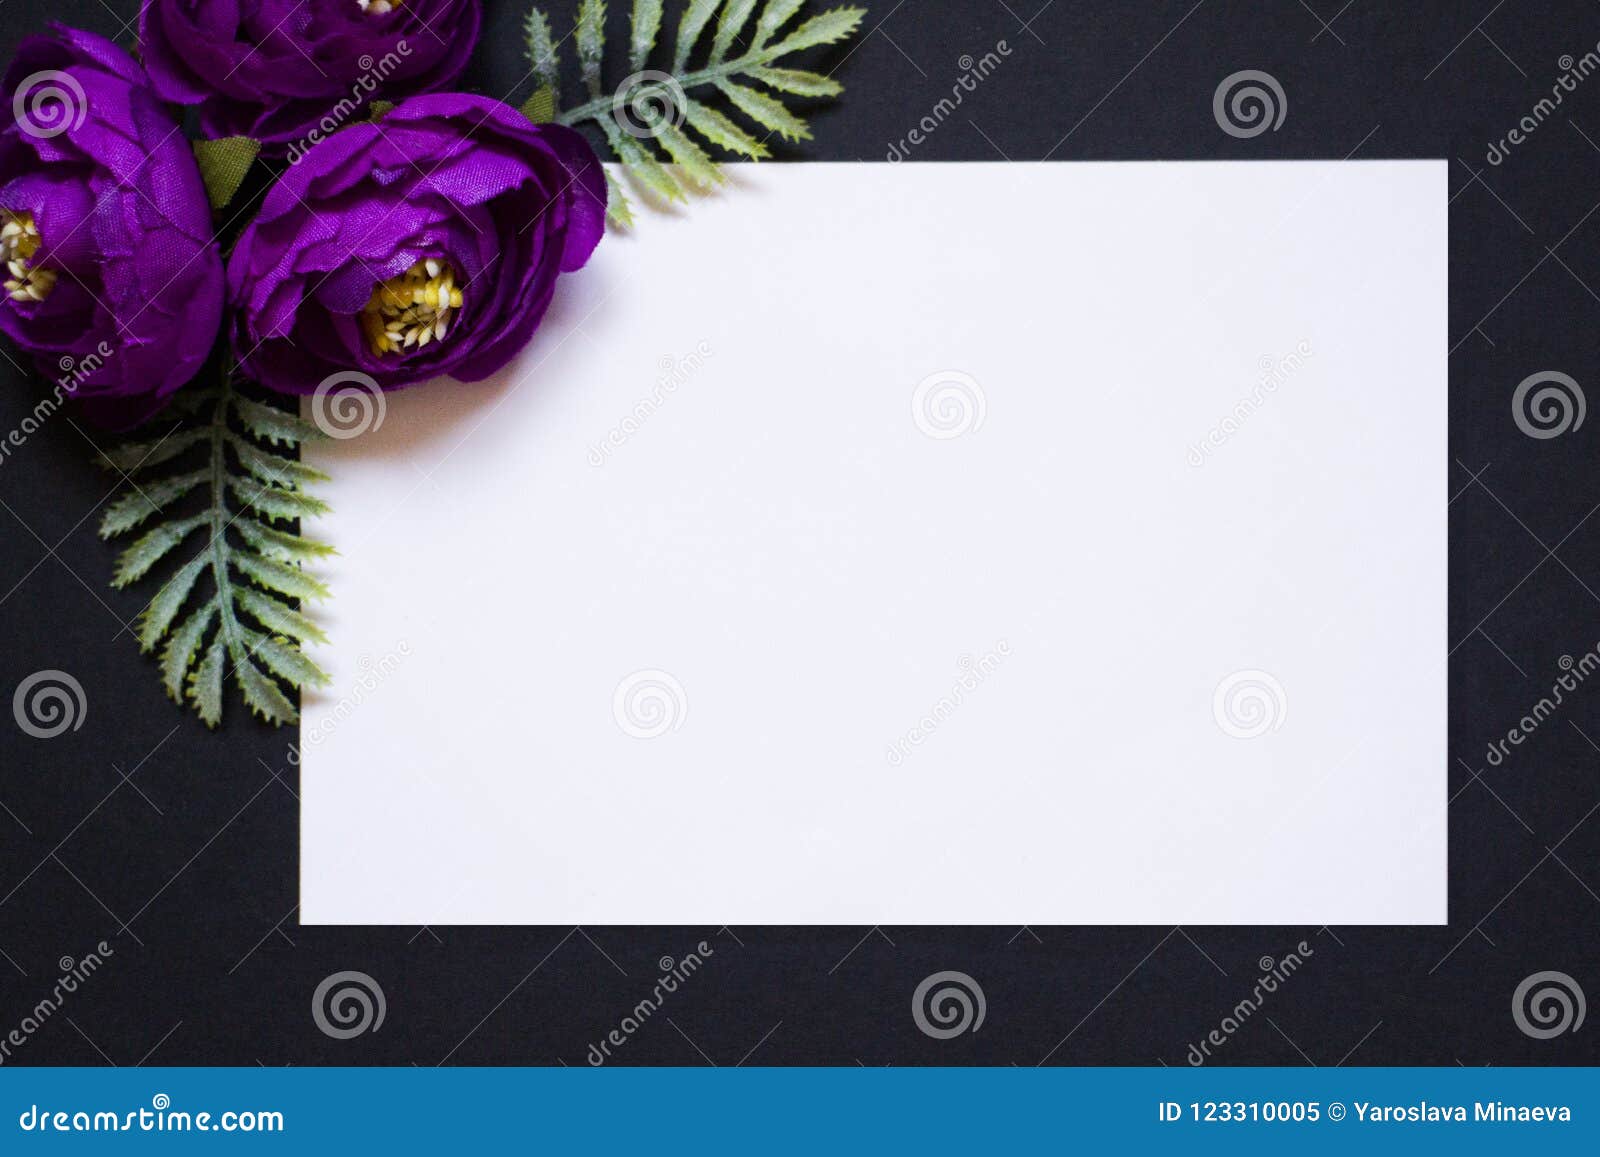 Violet Flowers On A Black Background White Rectangle On A Black Background A Blank For A Postcard Stock Image Image Of Texture Violet 123310005